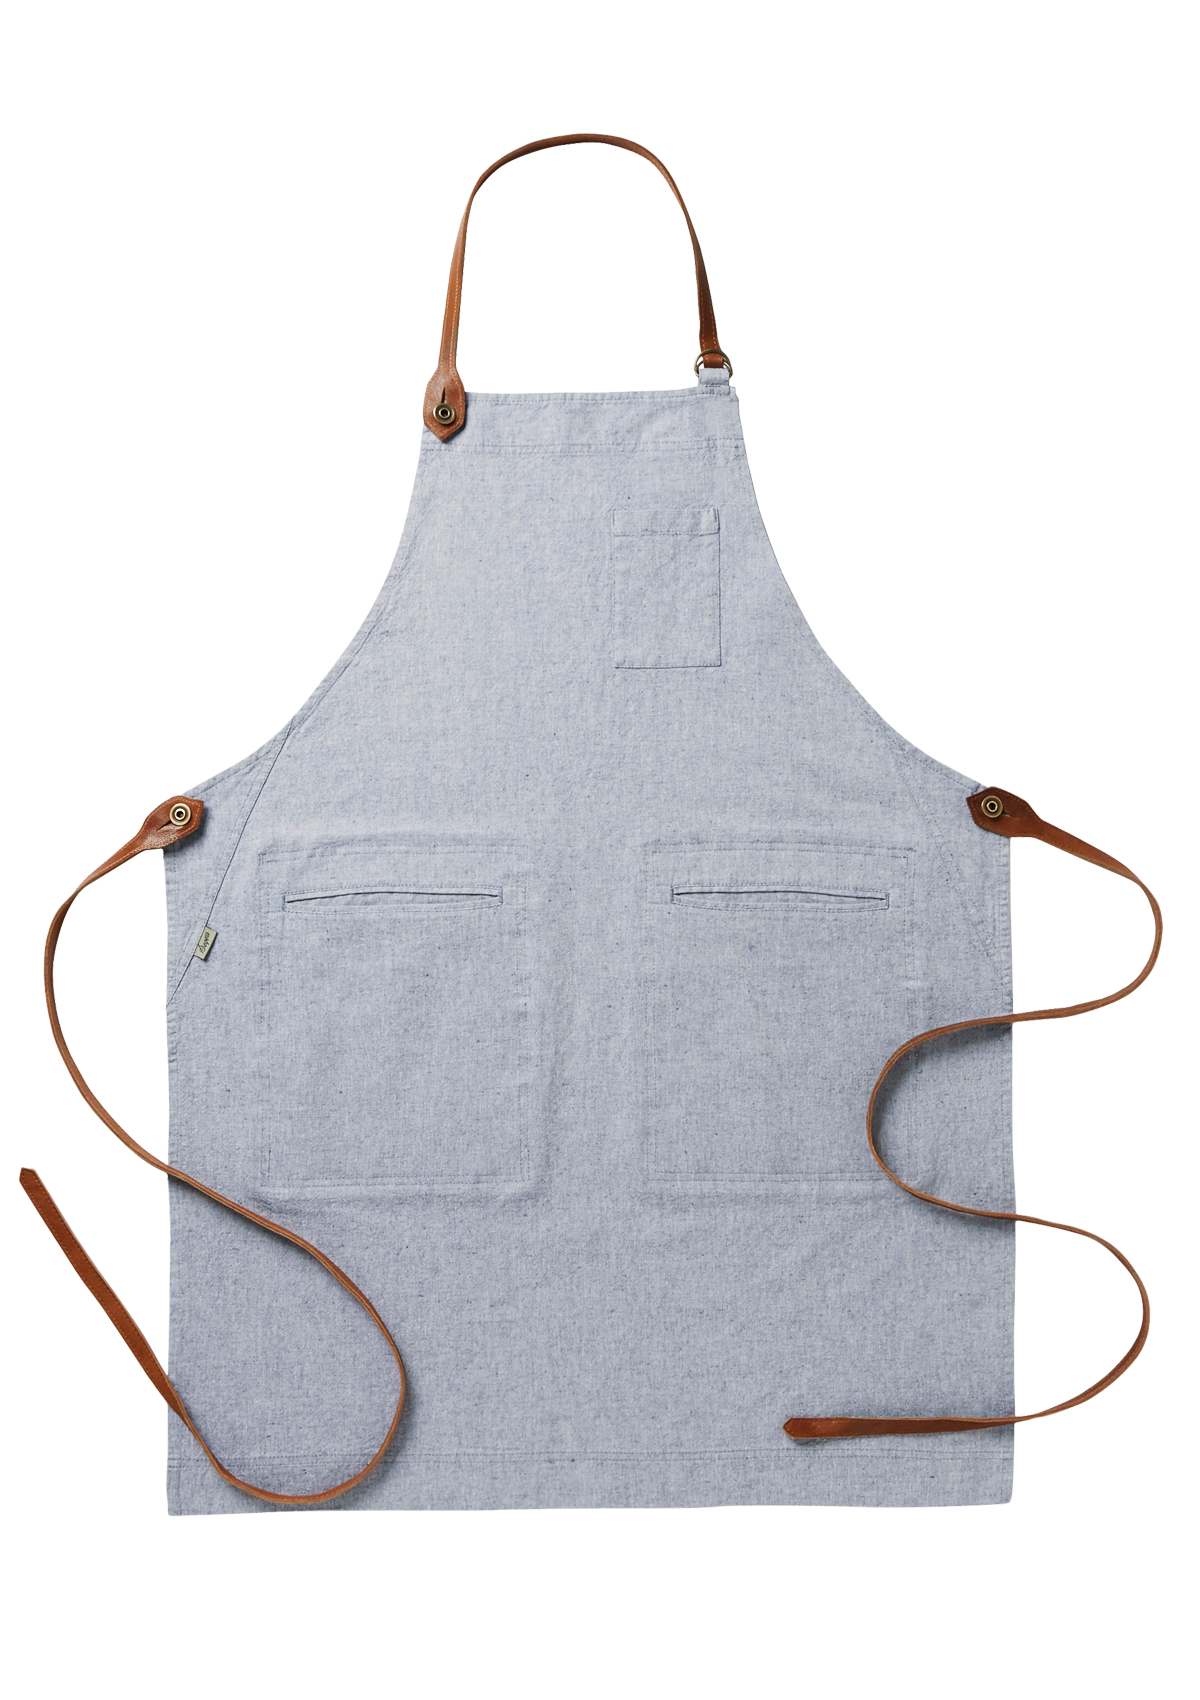 Bib Apron with Real Leather Details